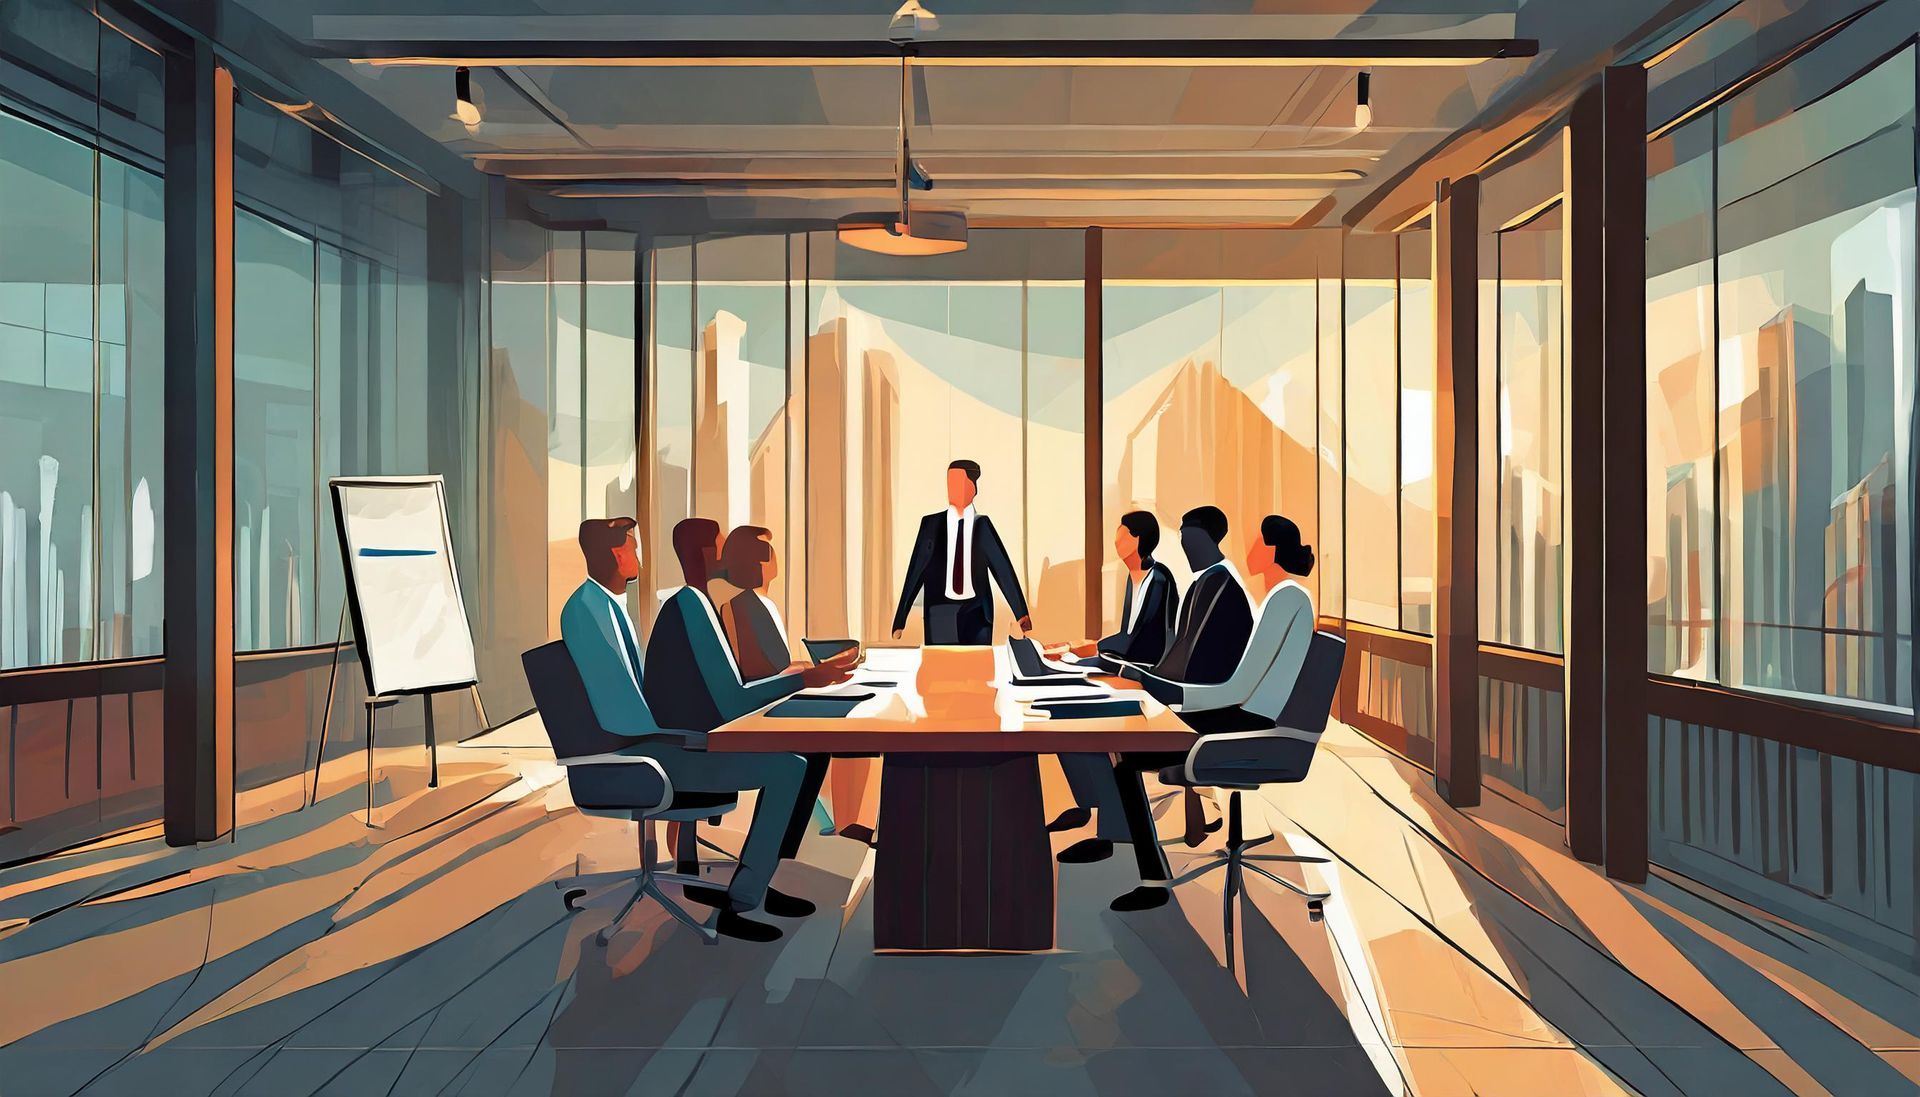 A group of people having a business meeting